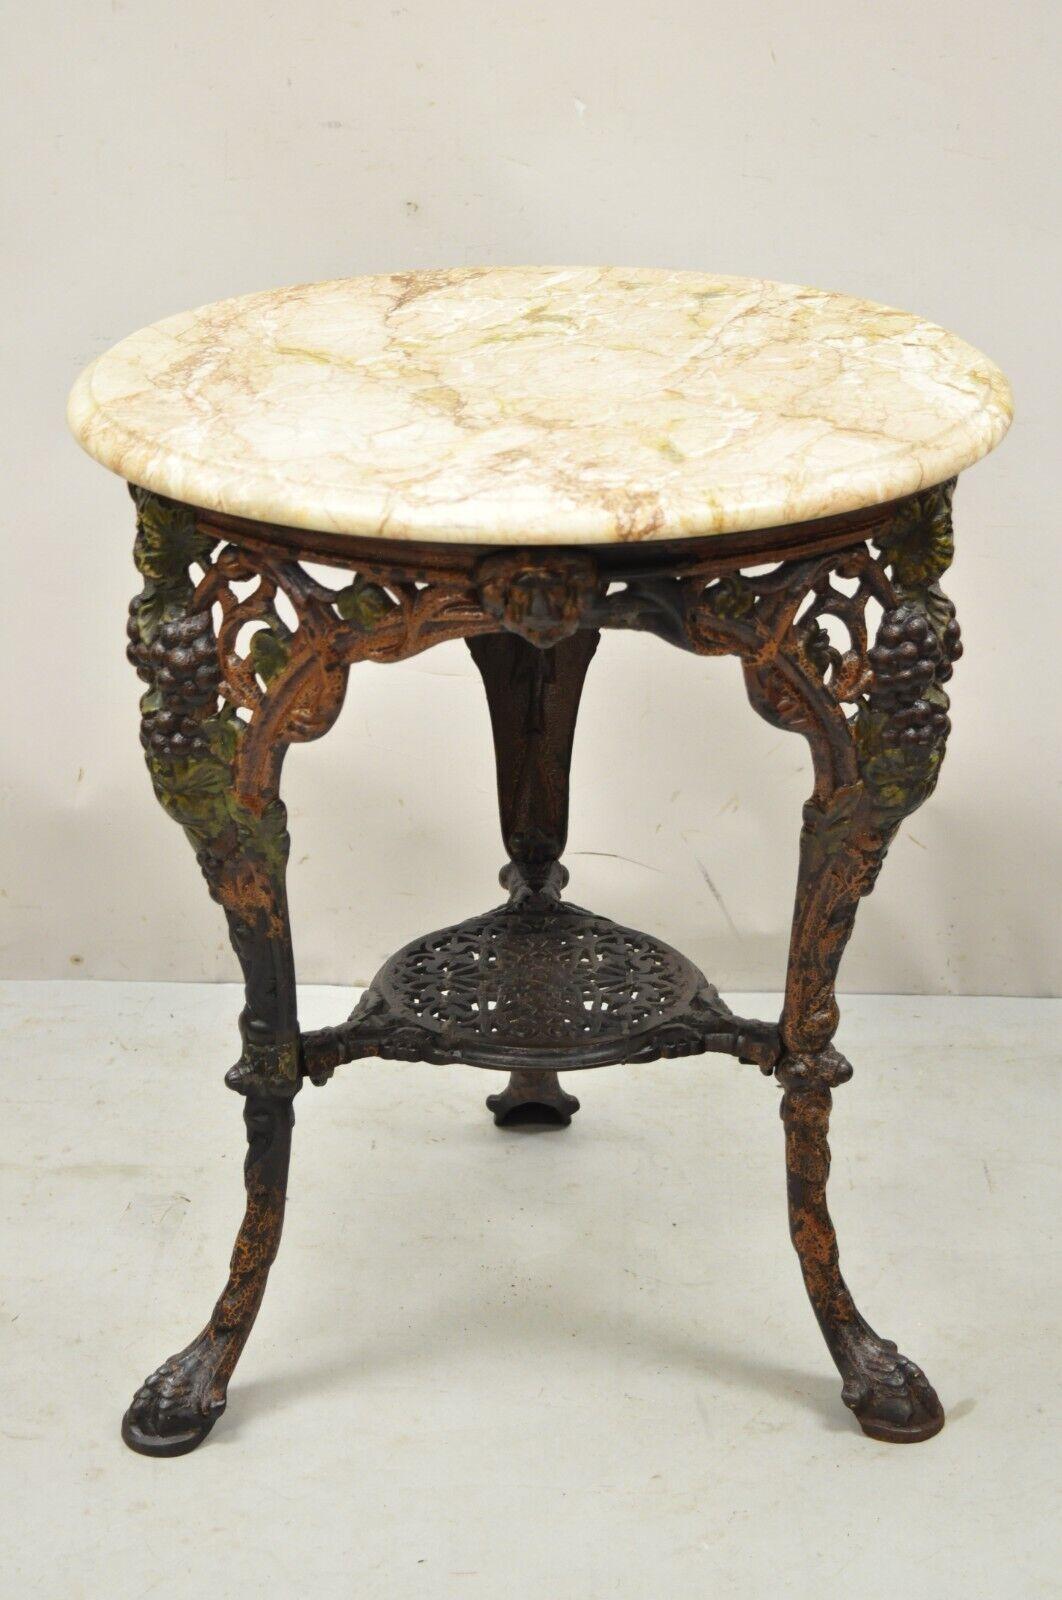 Antique English Victorian cast iron round marble top pub table. Item features lion heads, grape vine details, round marble top, heavy cast iron base, very nice antique item. Circa early 1900s. Measurements: 29